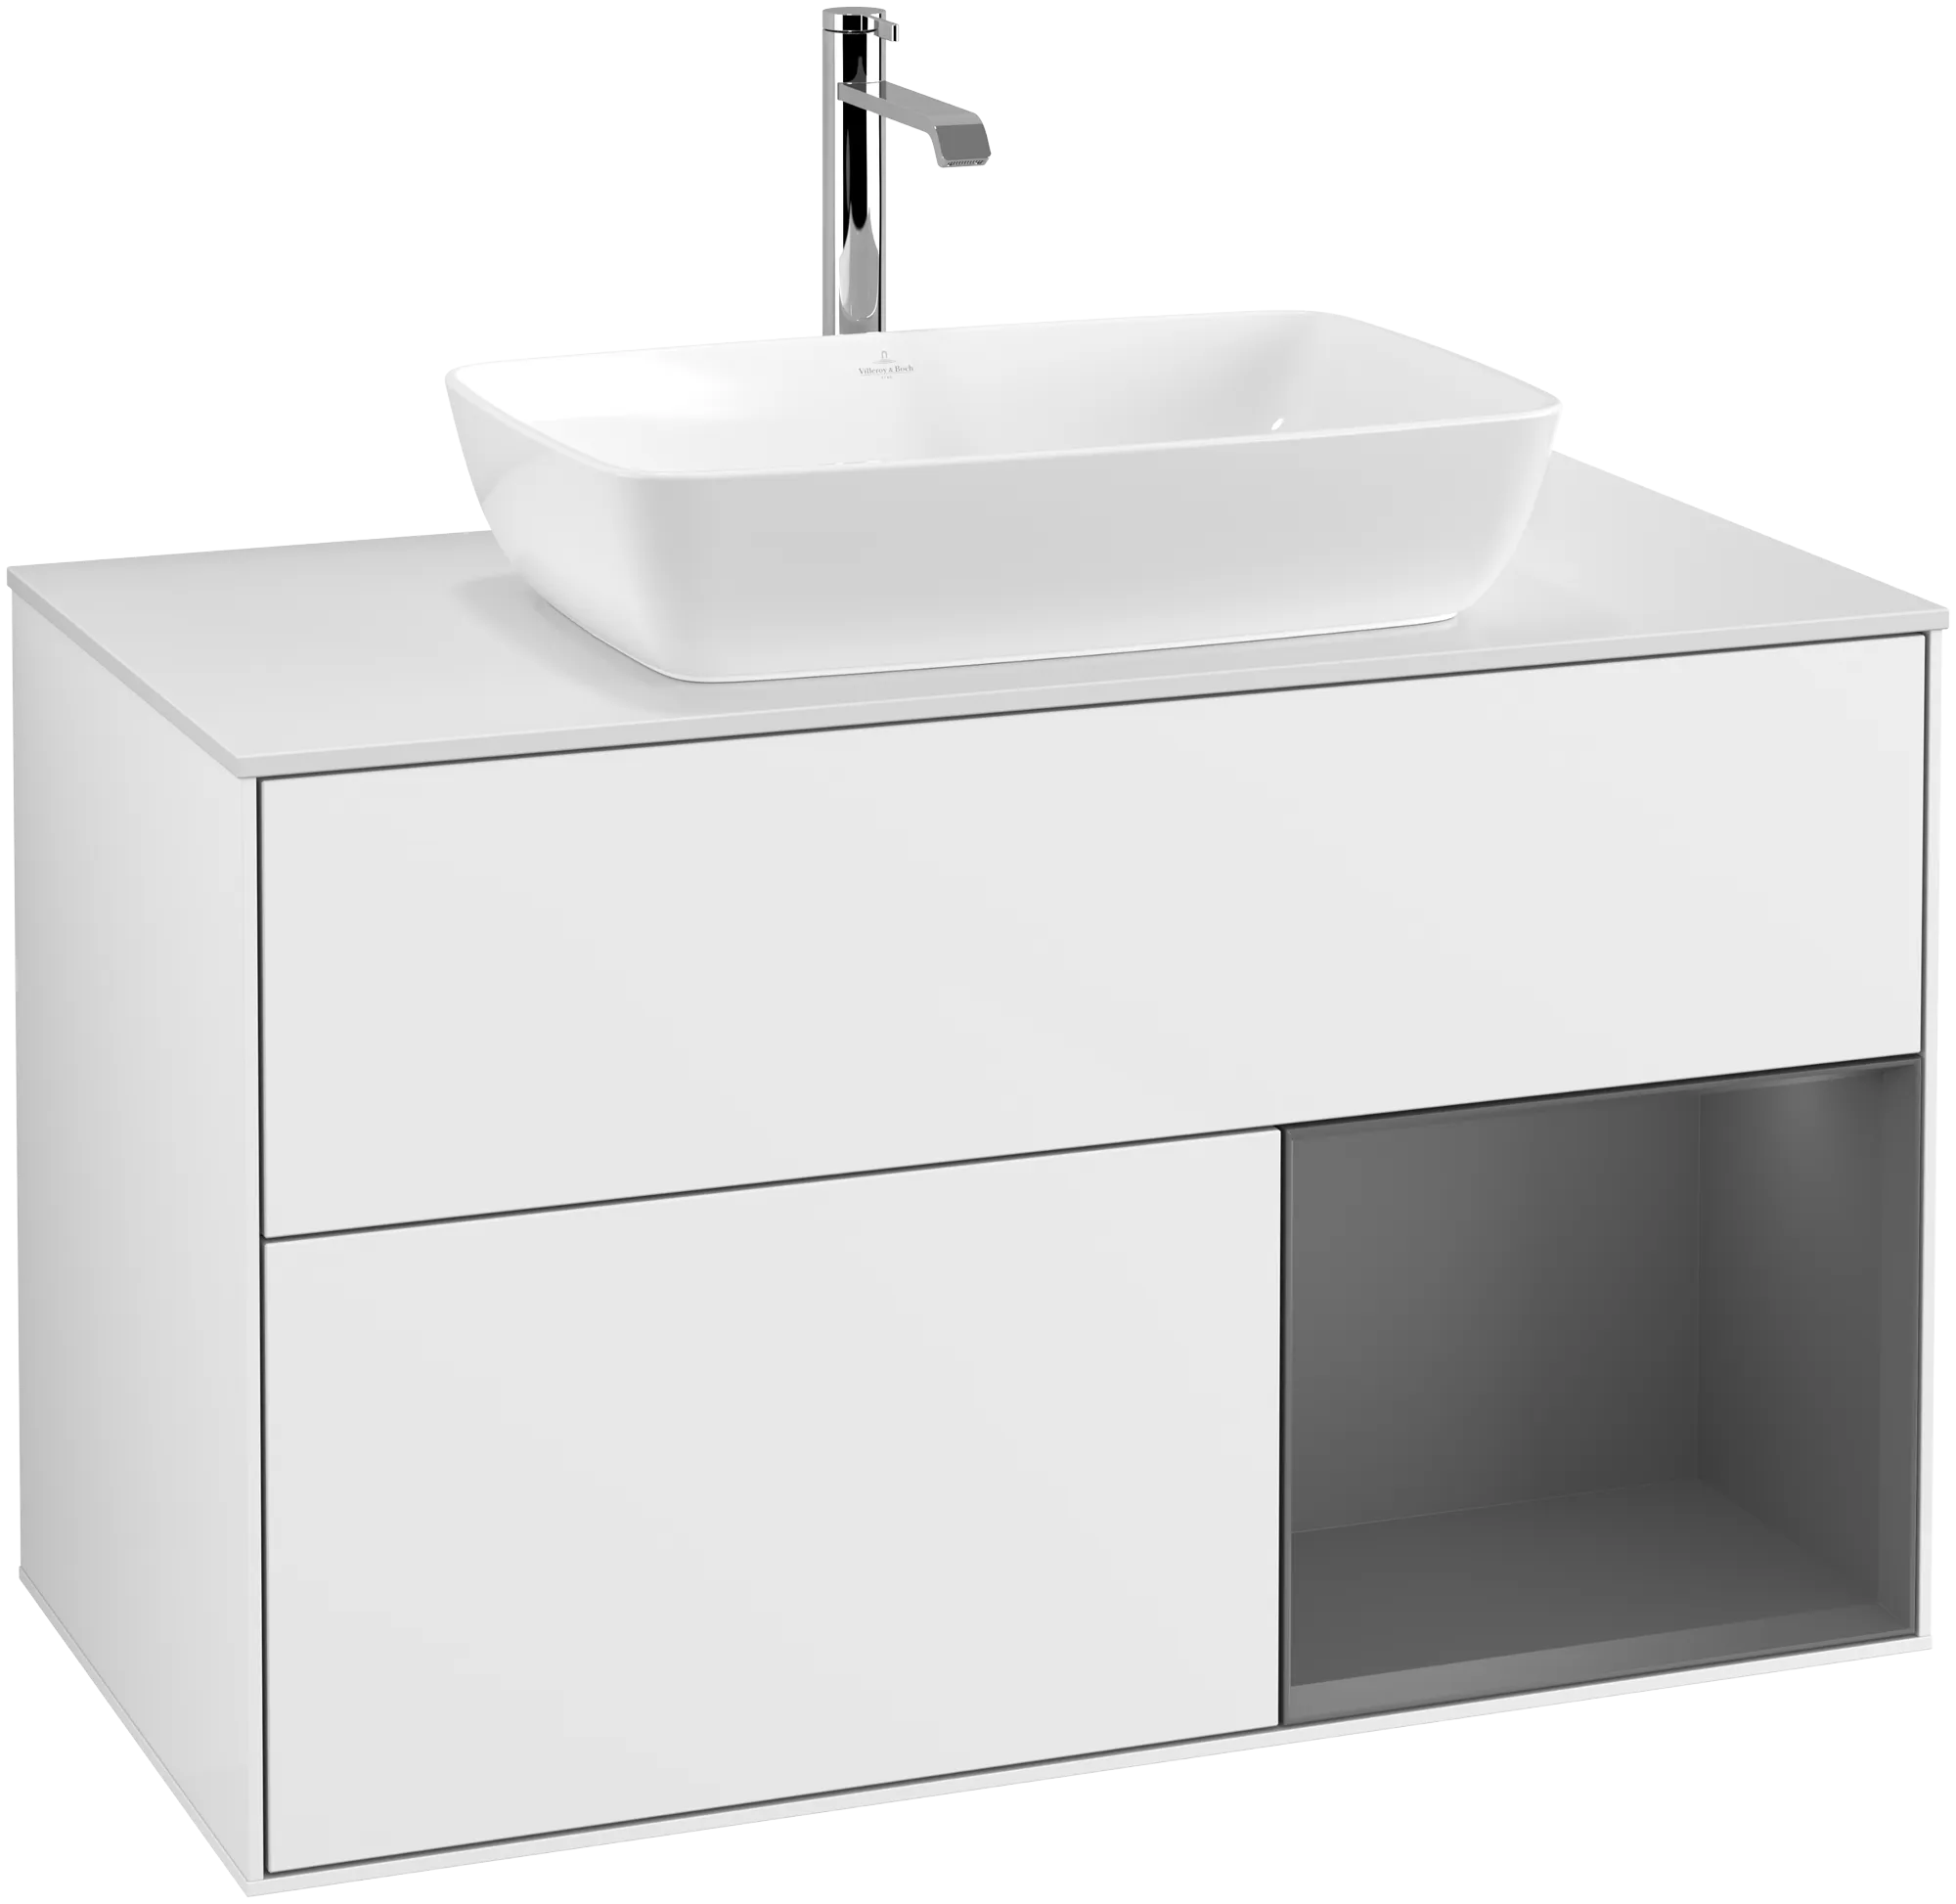 Obrázek VILLEROY BOCH Finion Vanity unit, with lighting, 2 pull-out compartments, 1000 x 603 x 501 mm, Glossy White Lacquer / Anthracite Matt Lacquer / Glass White Matt #G781GKGF